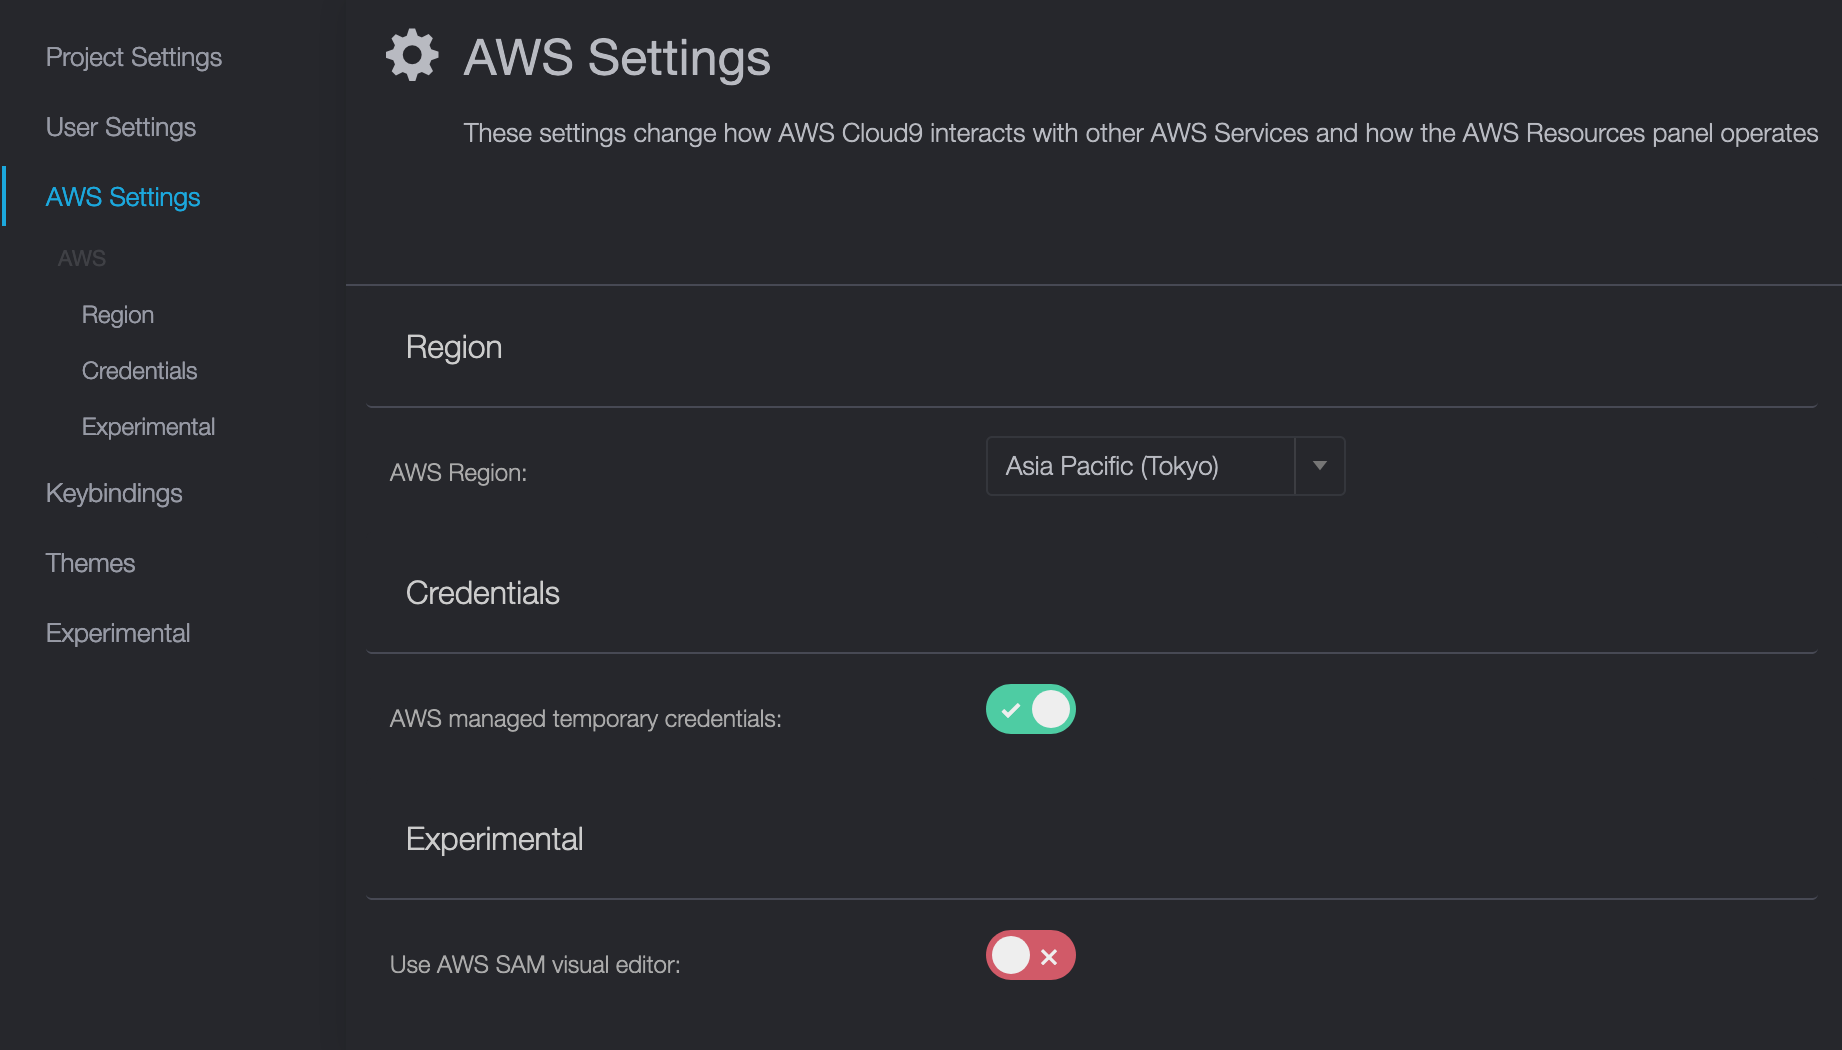 _images/_preferences-aws_settings.png